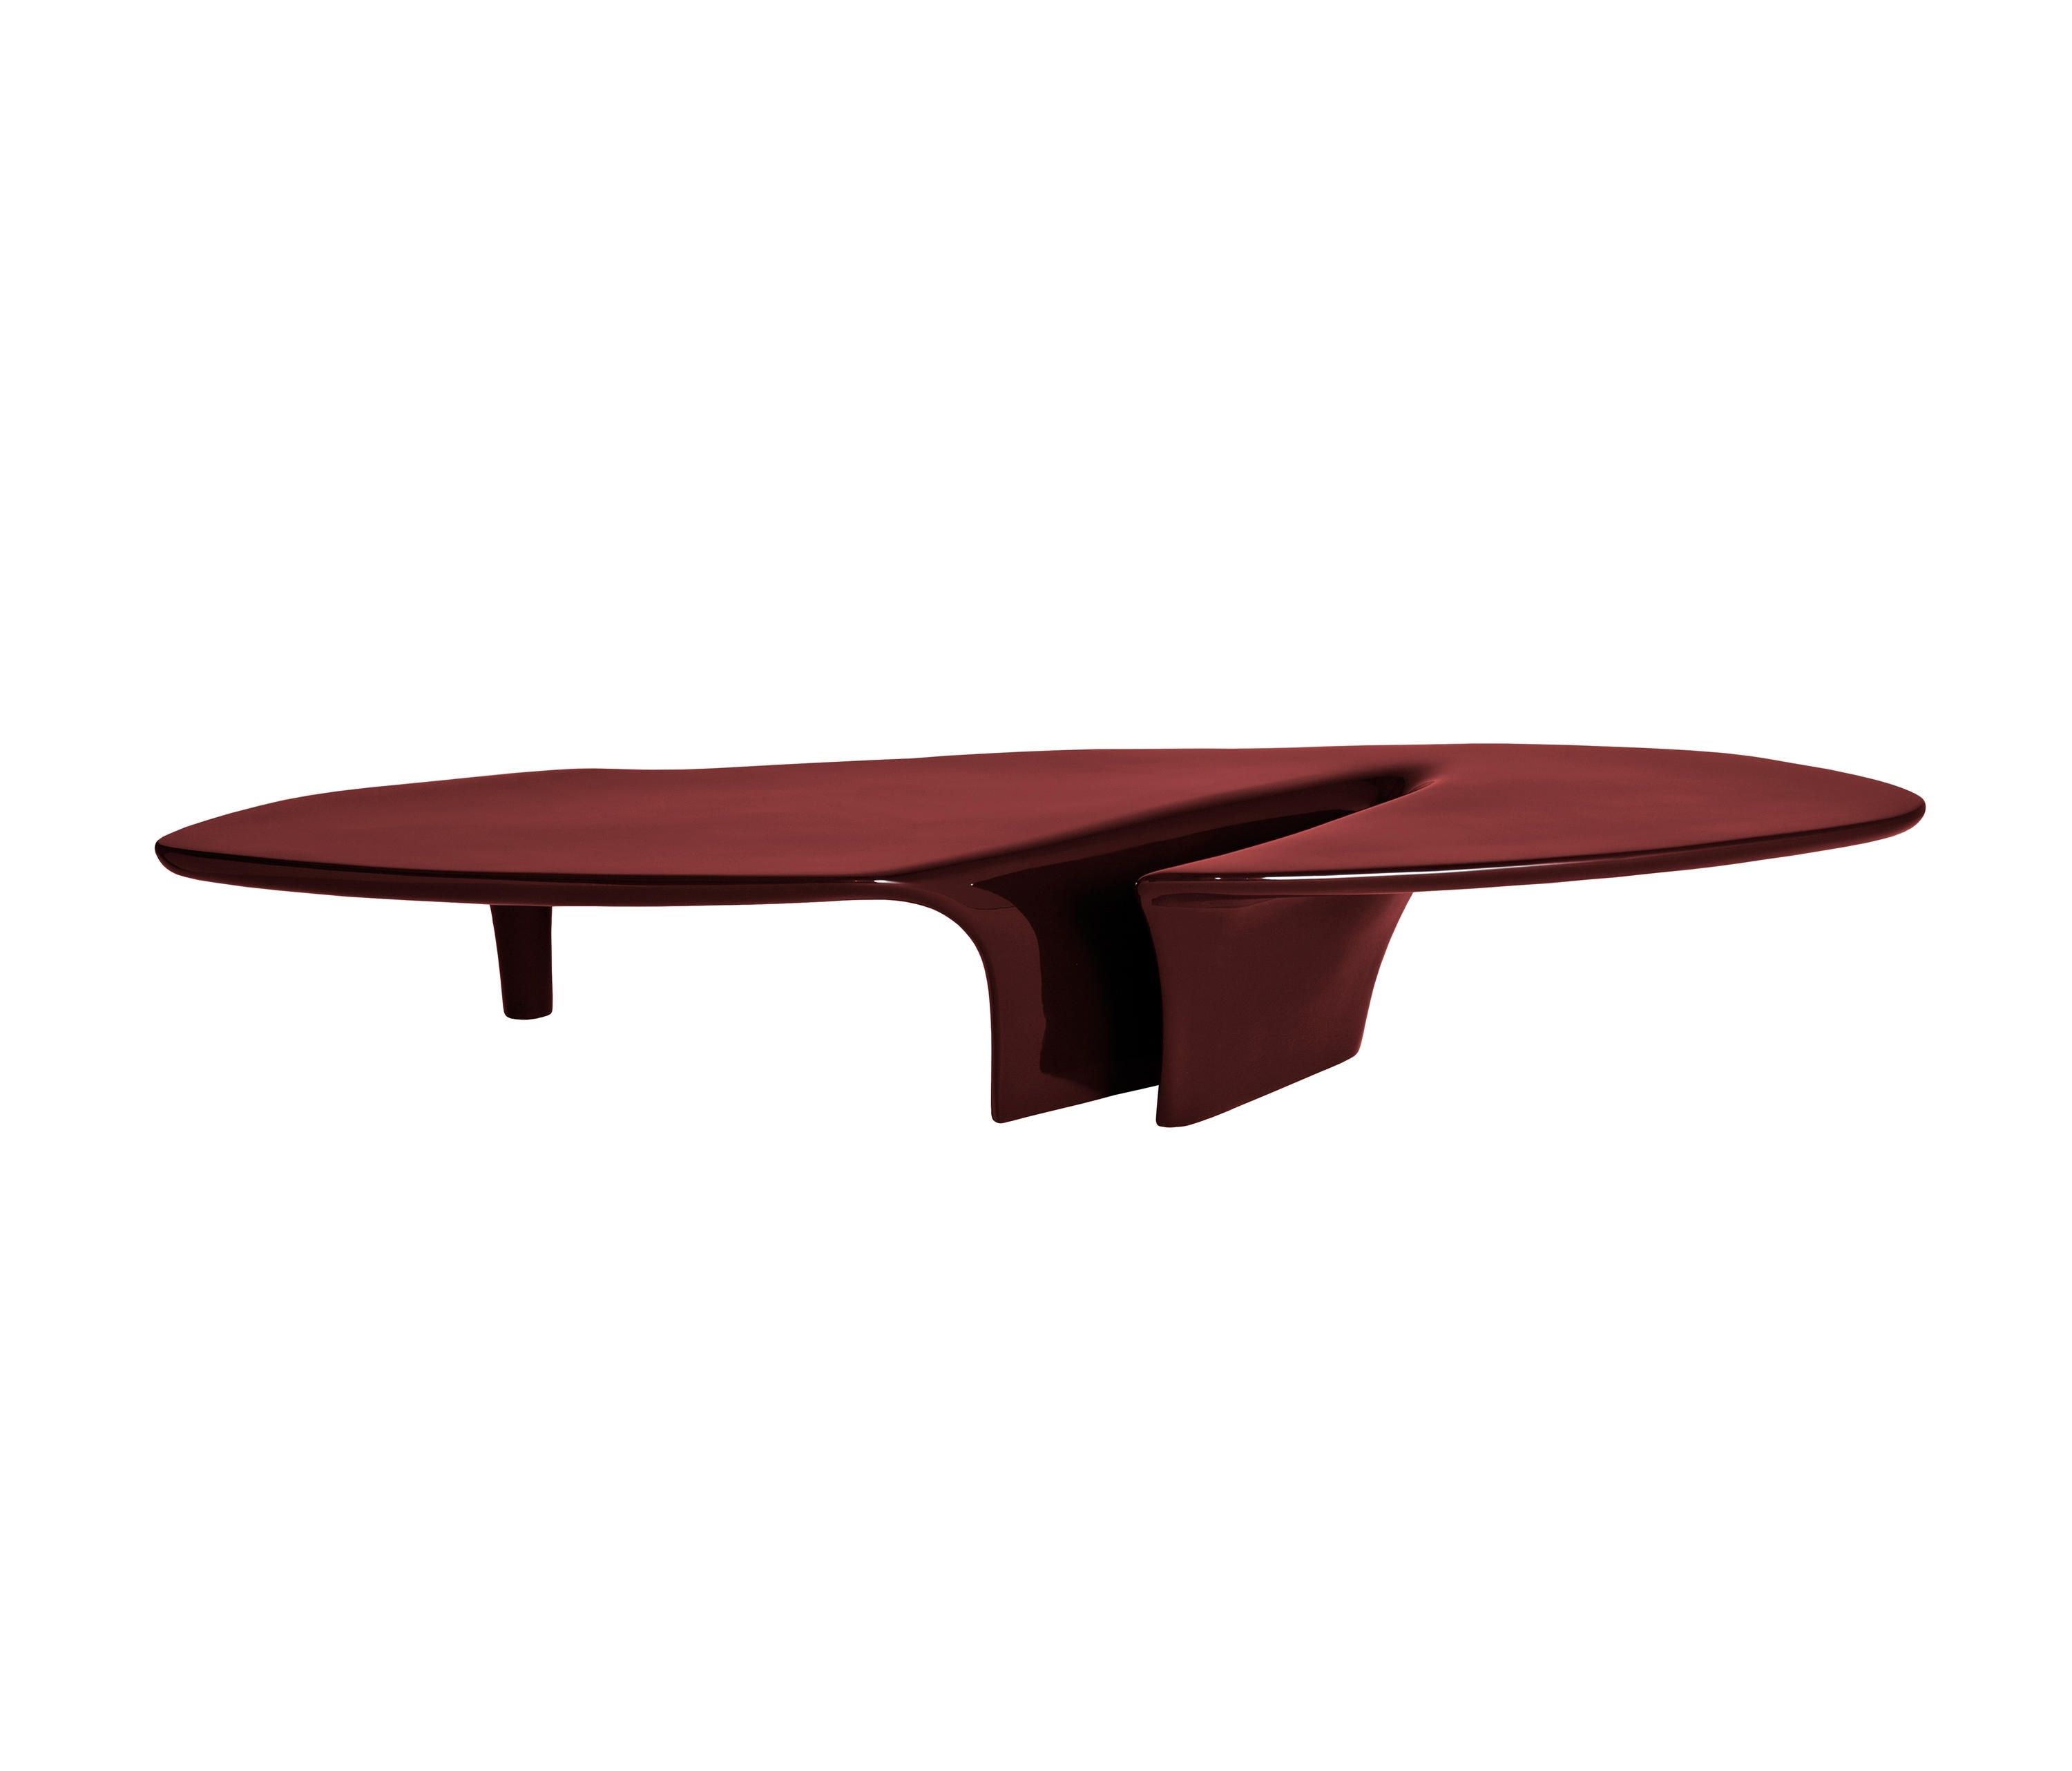 Architonic Pertaining To 2018 Expressionist Coffee Tables (View 4 of 20)